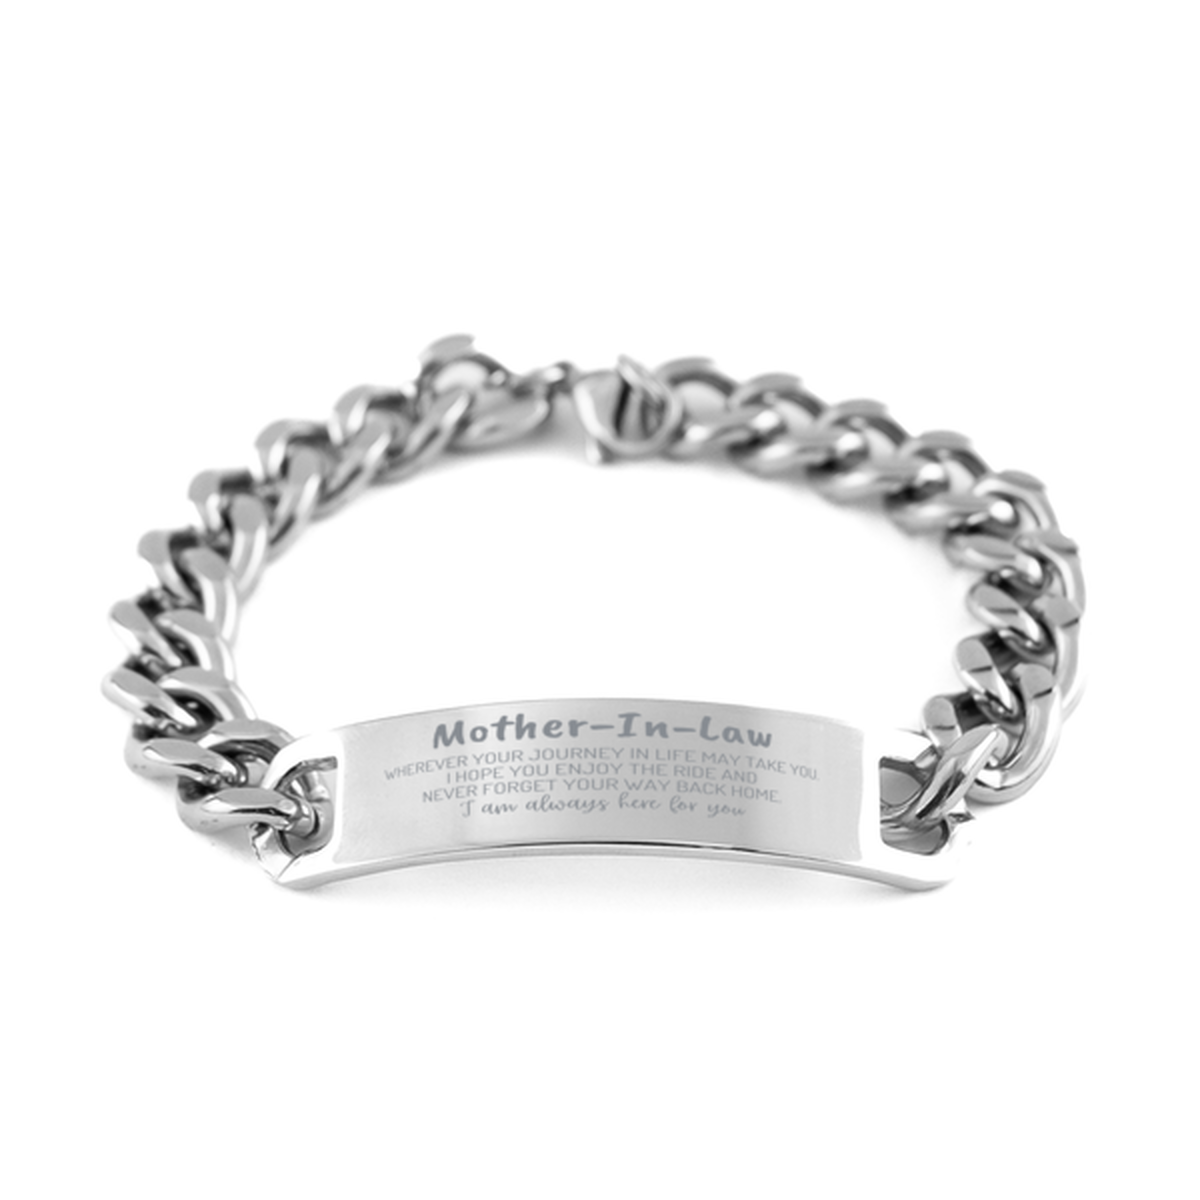 Mother-In-Law wherever your journey in life may take you, I am always here for you Mother-In-Law Cuban Chain Stainless Steel Bracelet, Awesome Christmas Gifts For Mother-In-Law, Mother-In-Law Birthday Gifts for Men Women Family Loved One